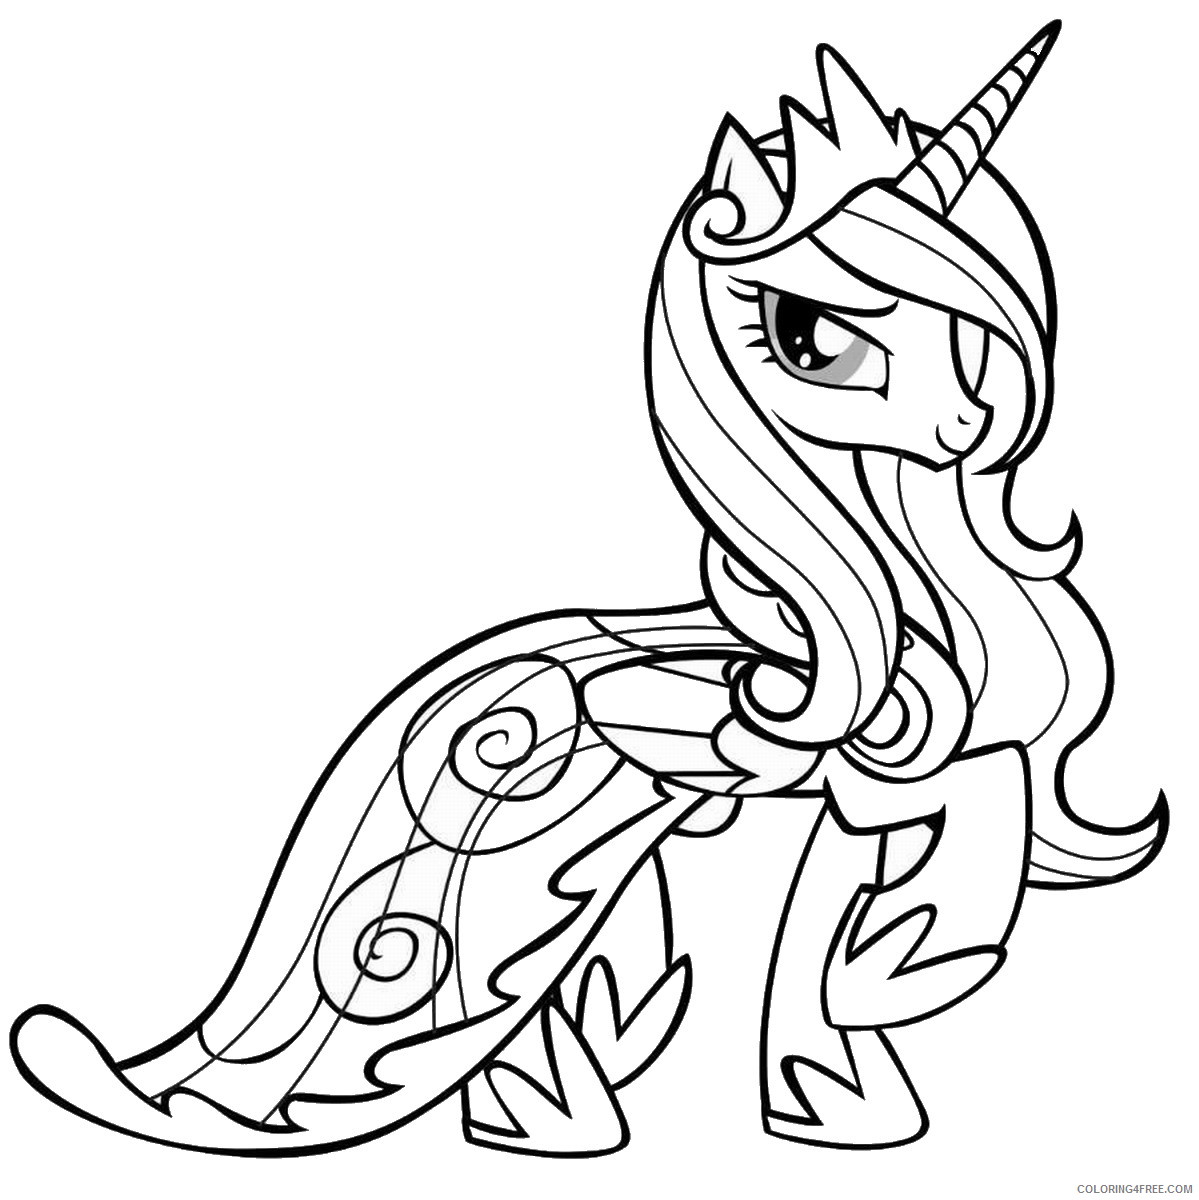 My Little Pony Coloring Pages Cartoons my little pony 27 Printable 2020 4471 Coloring4free